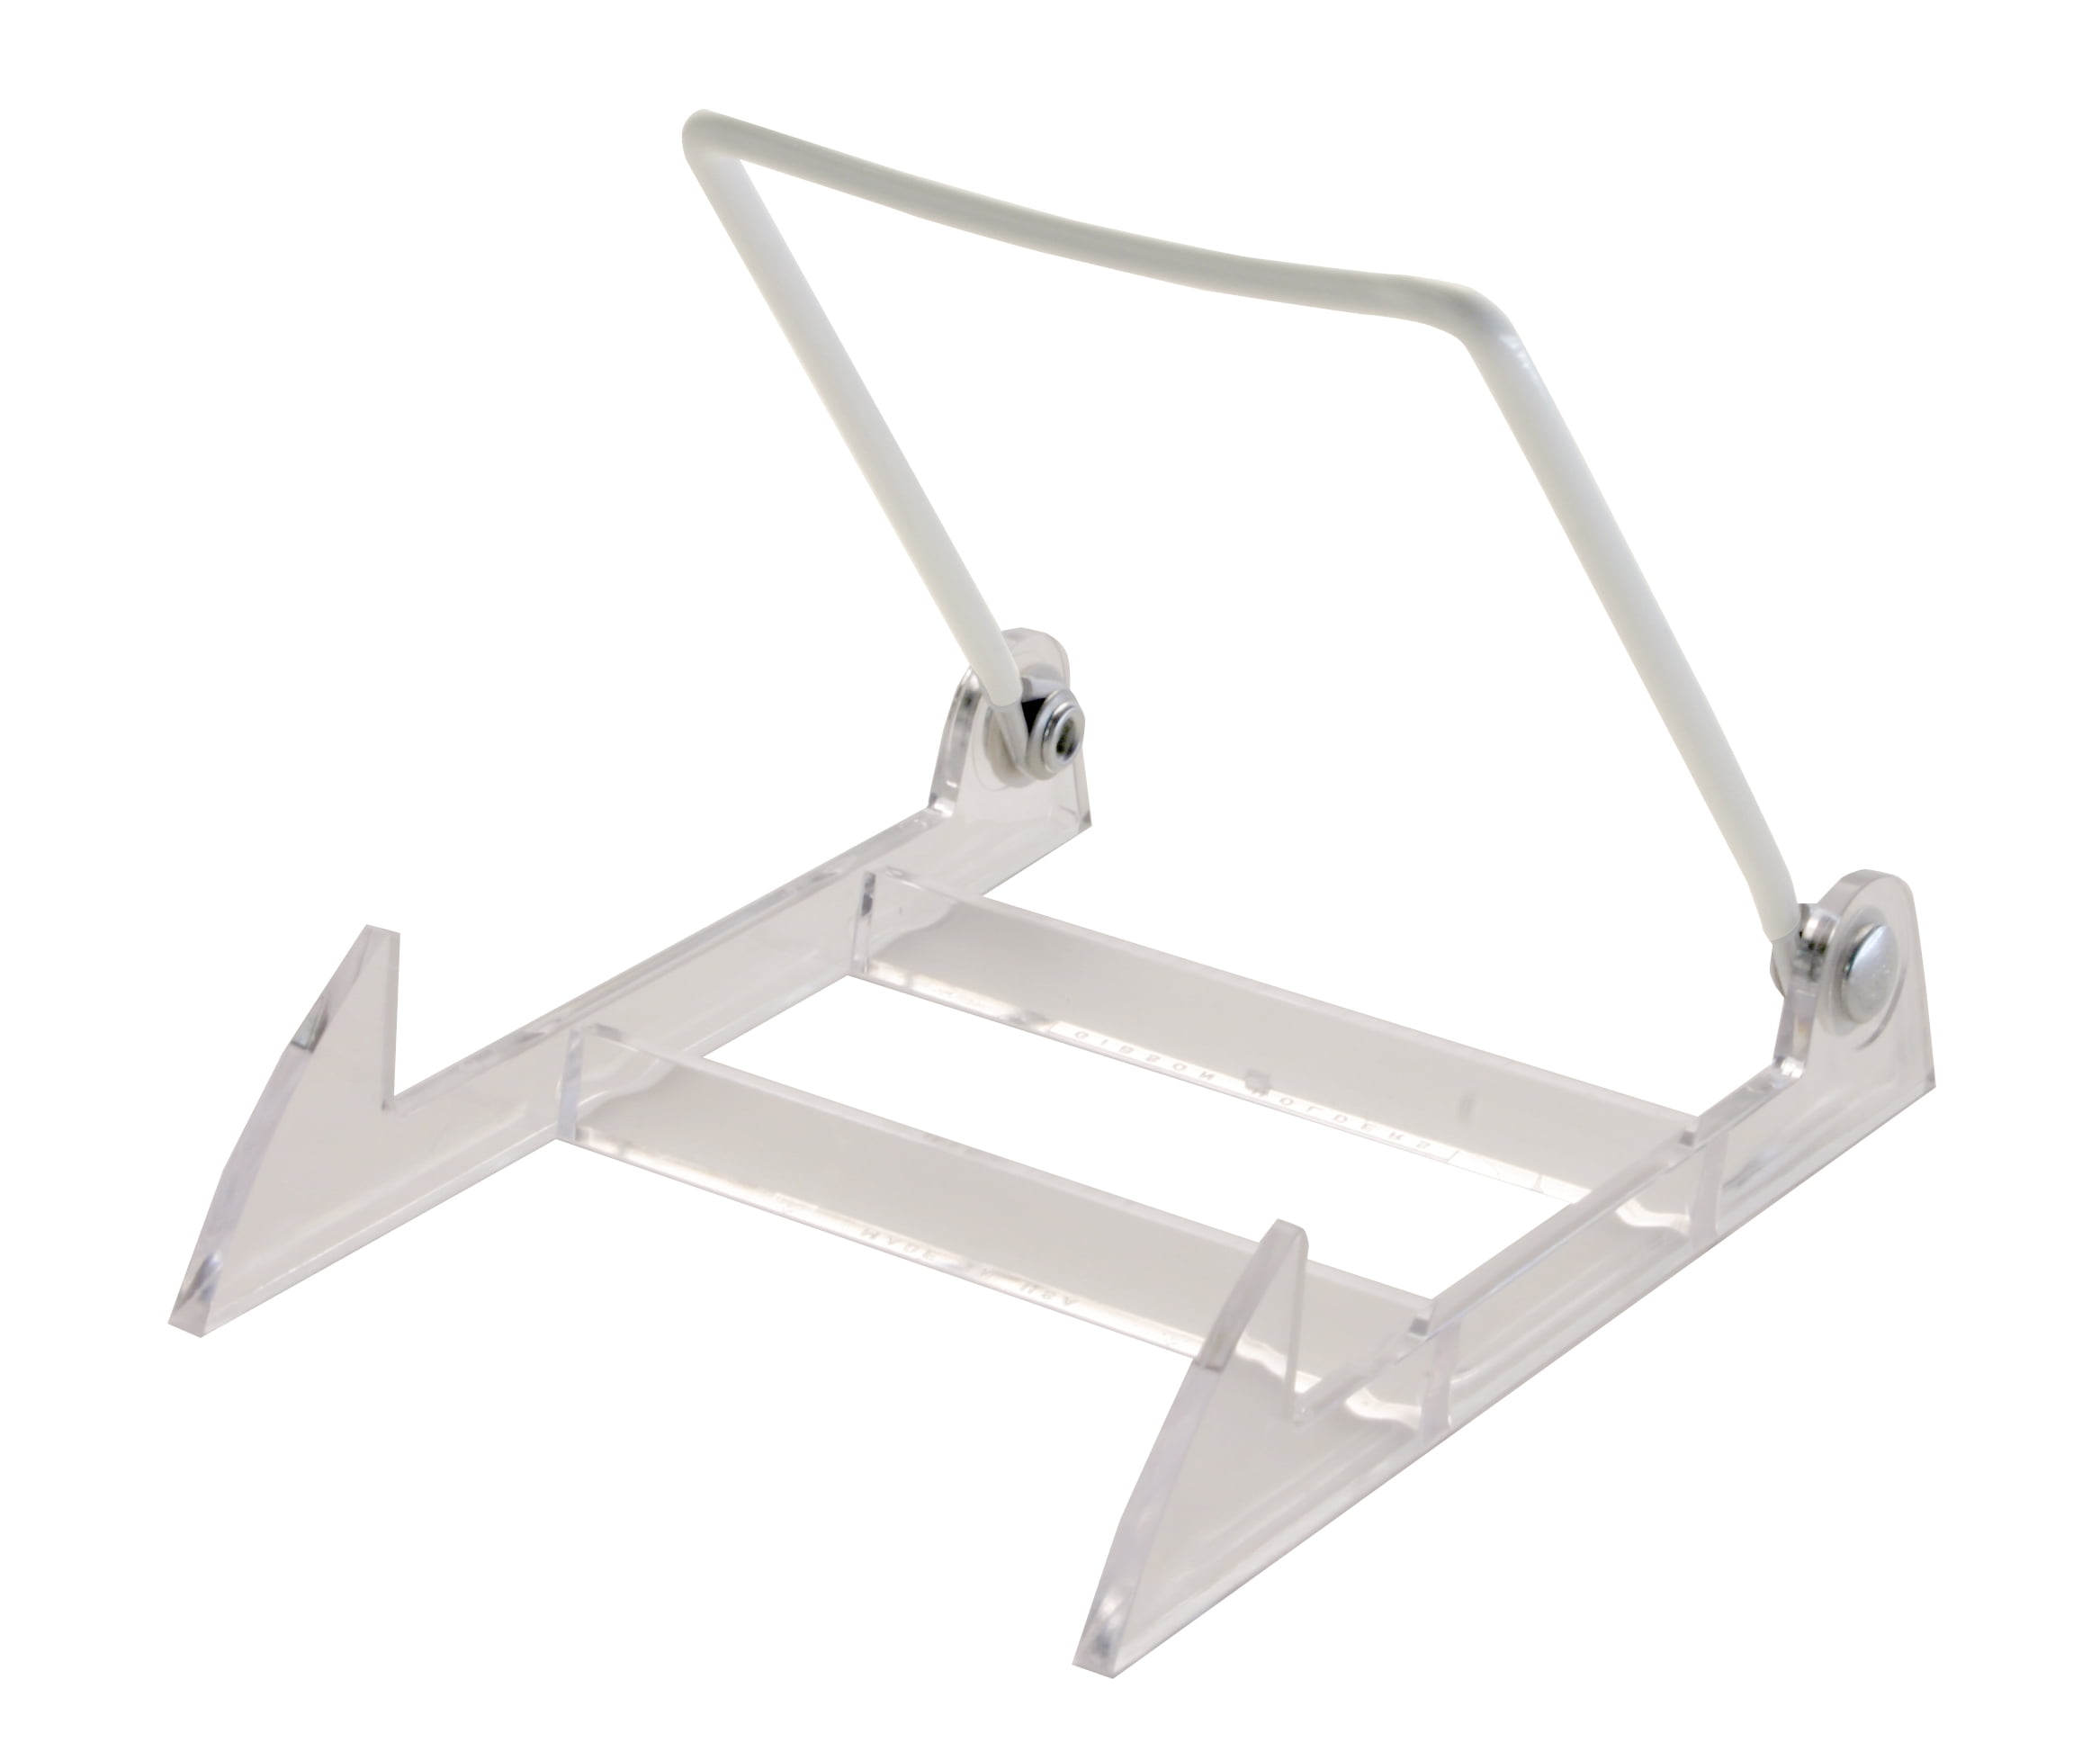 12 3PL Adjustable Wire & Acrylic Easels White/Clear 4" x 5.5" with 4.5" ledge 